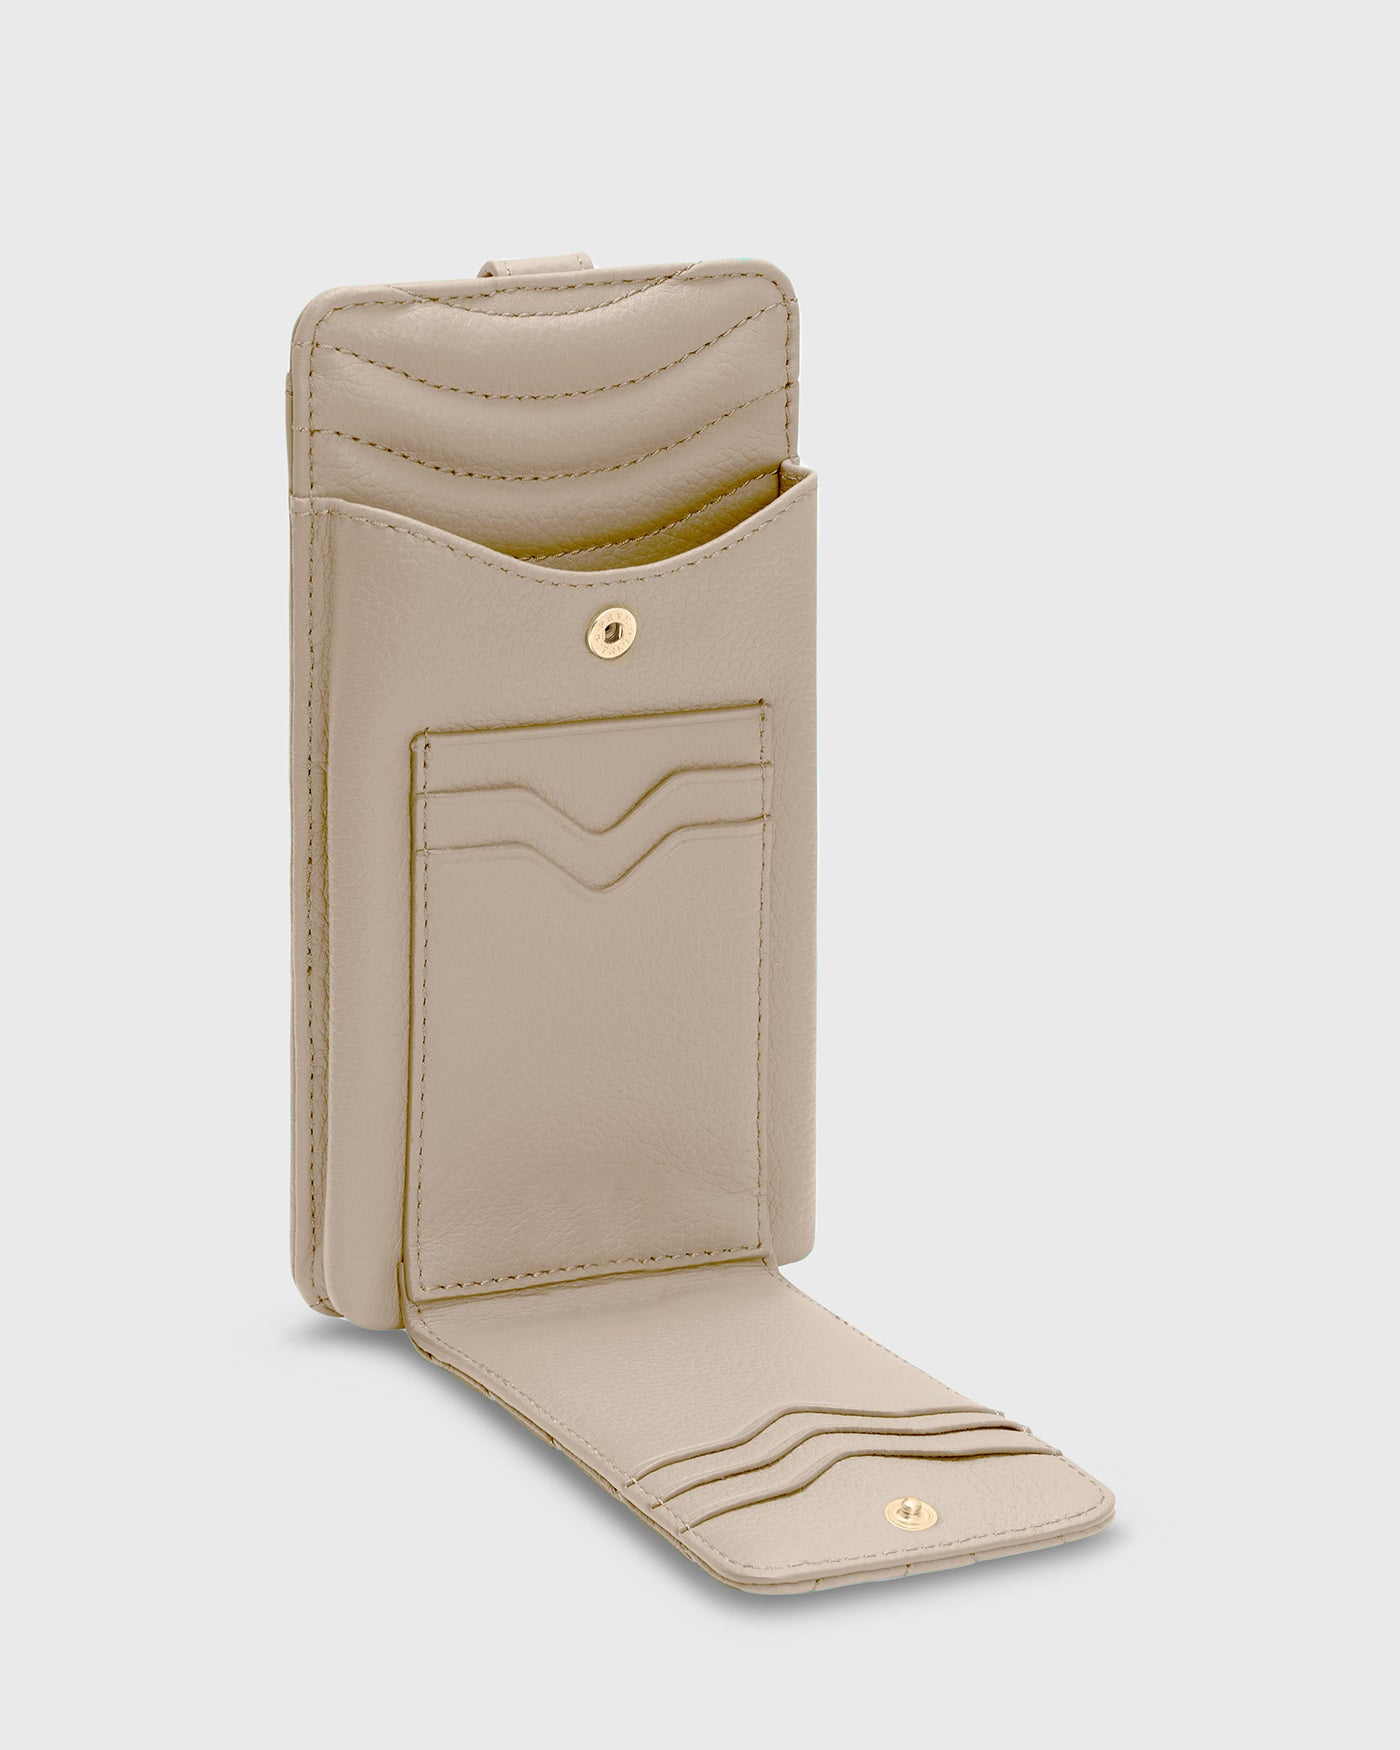 WEAT - PHONE WALLET TAUPE